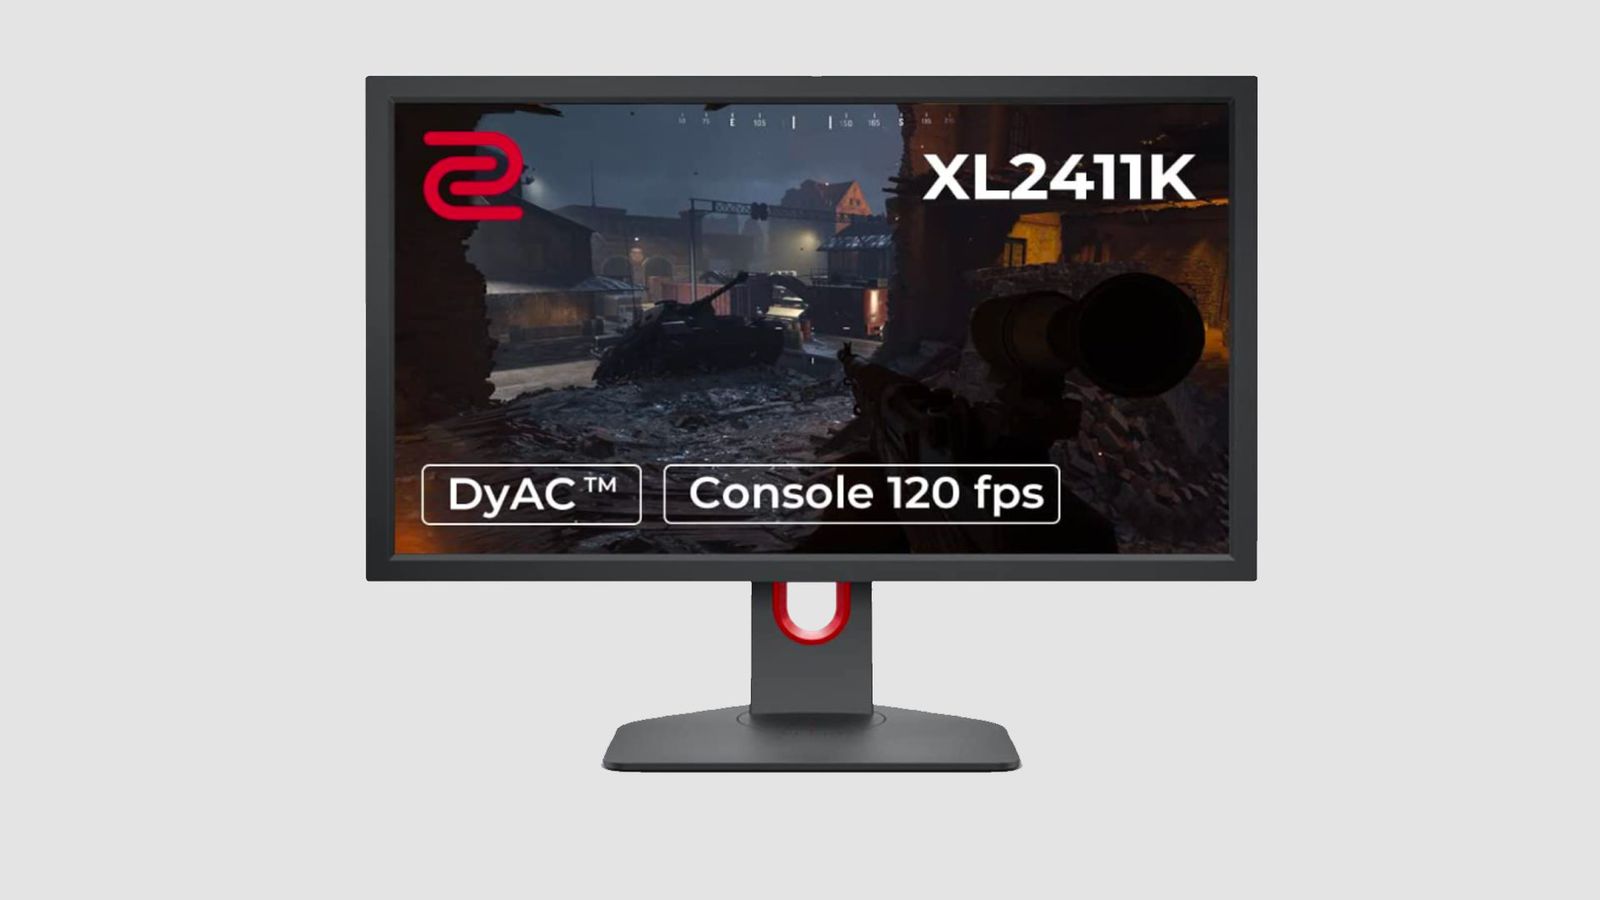 Best monitor for Warzone BenQ product image of a monitor with the key specs on the display.